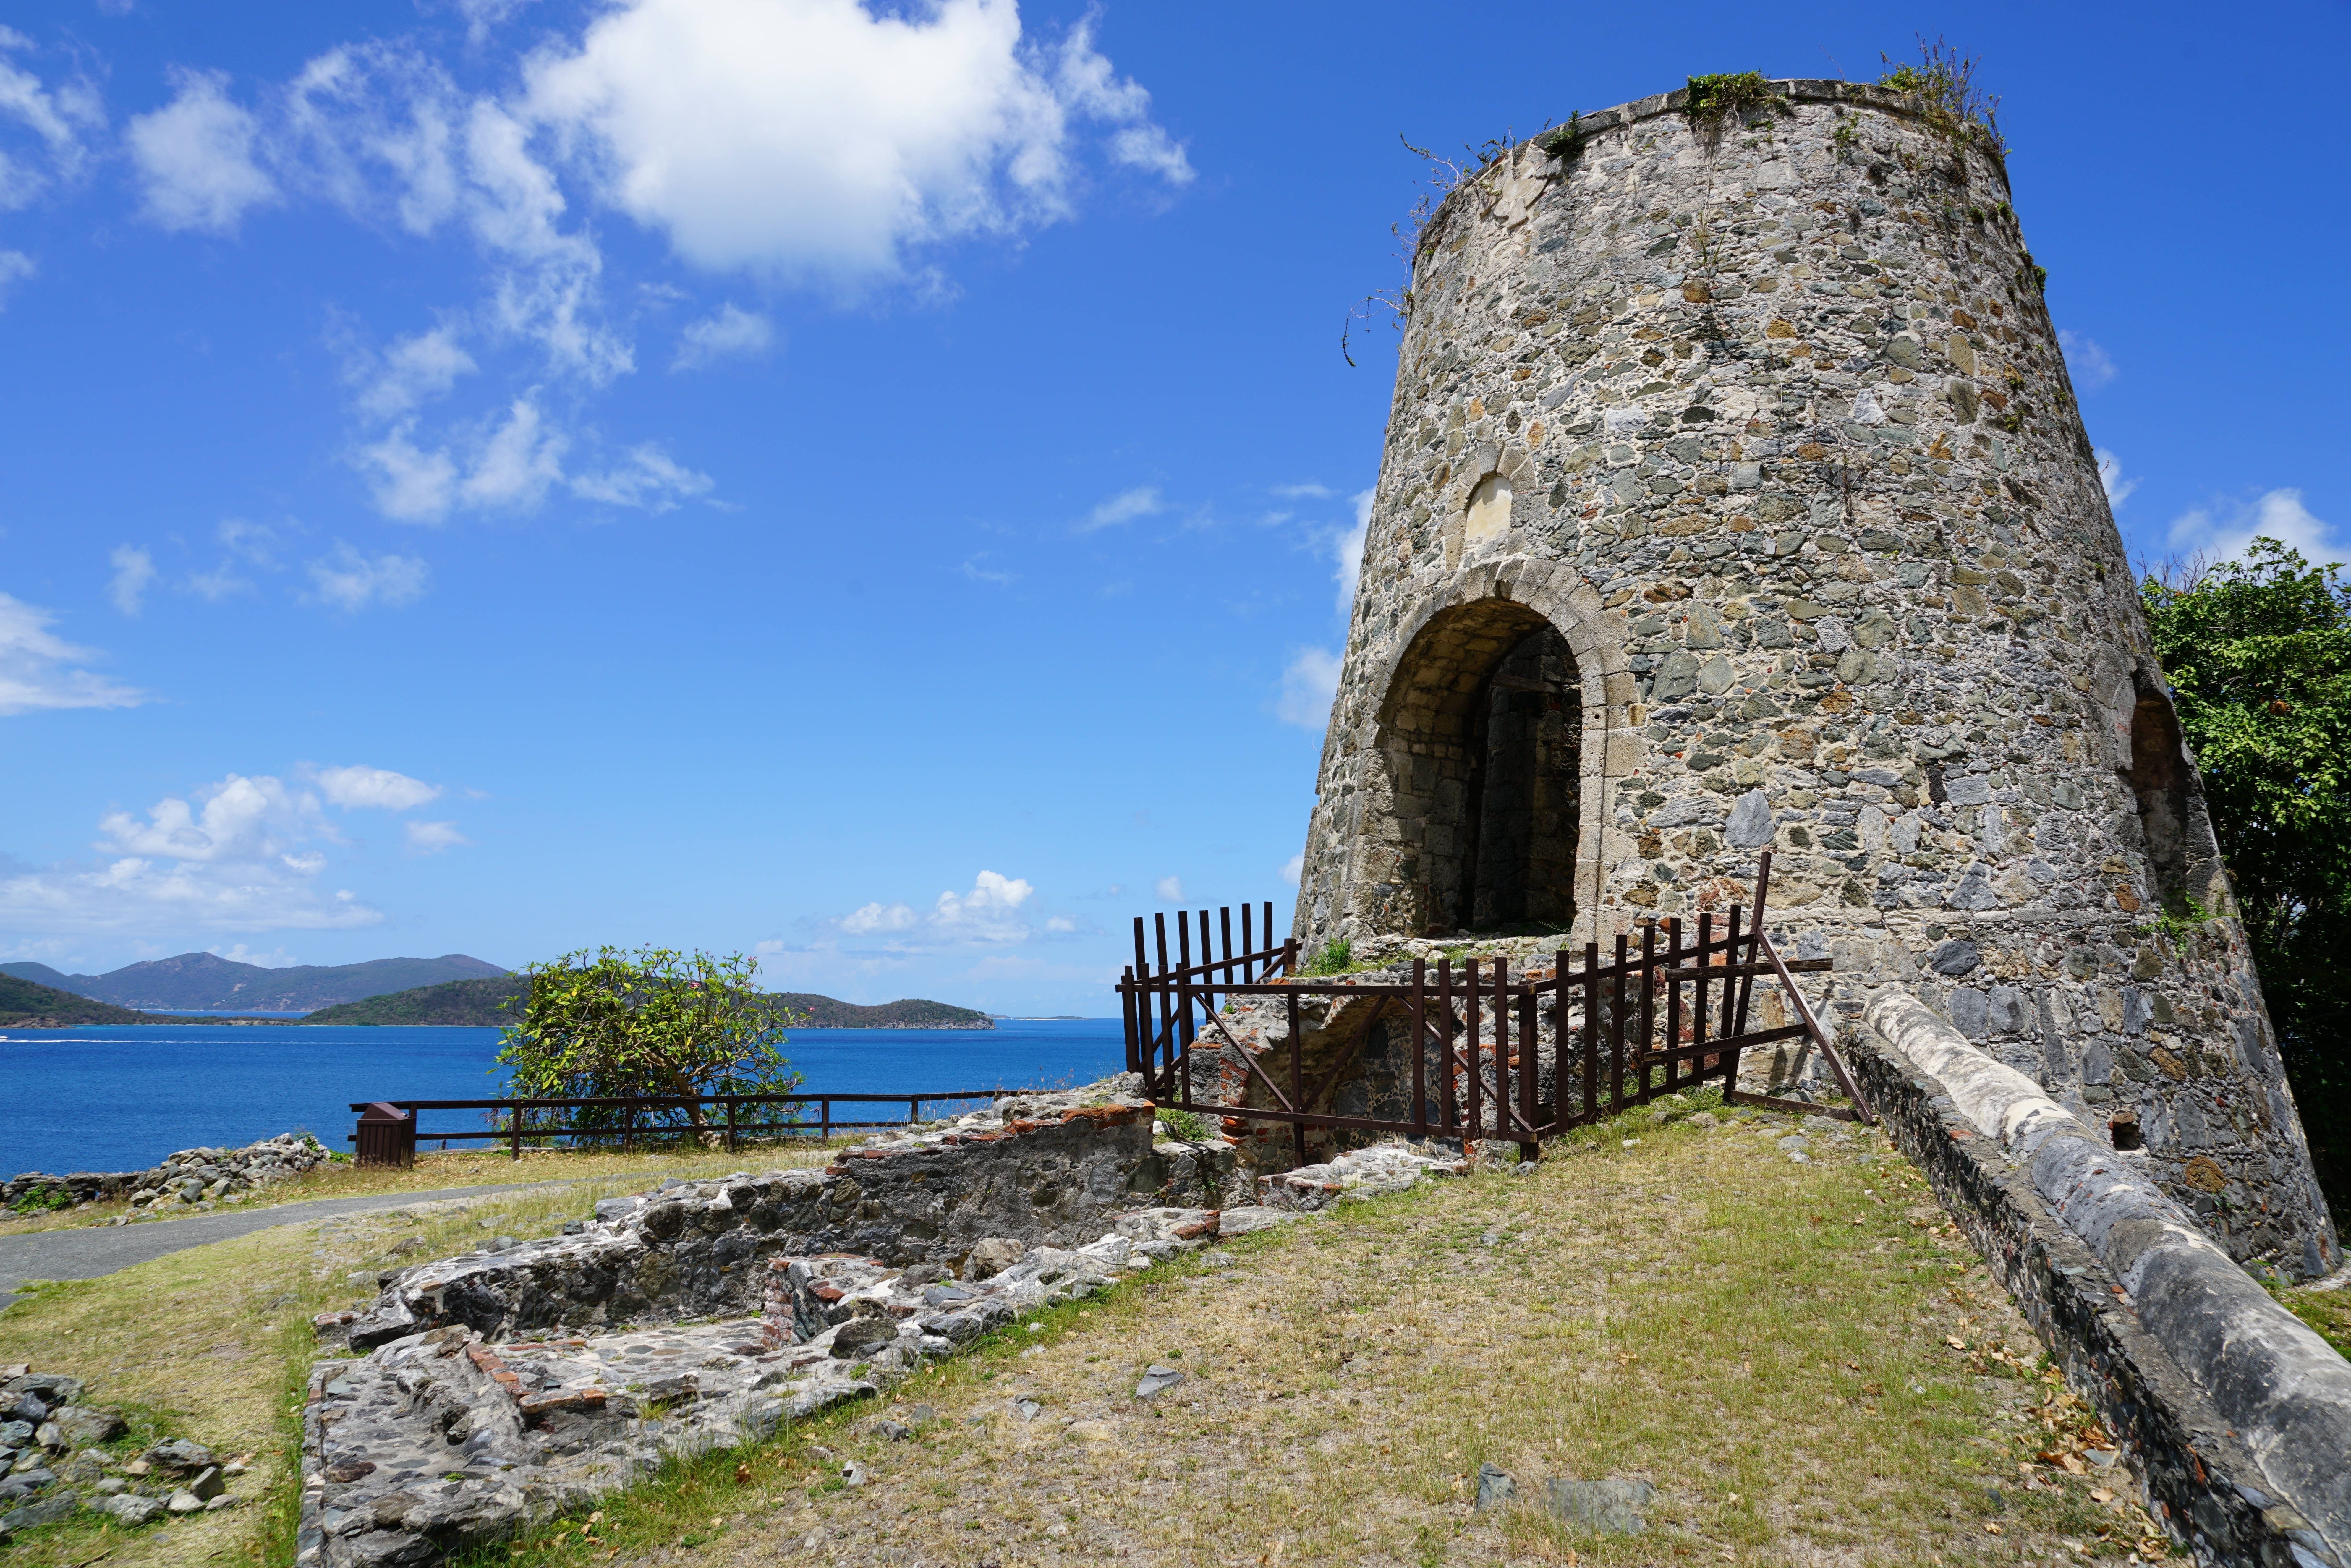 Annaberg sugar plantation ruins in stone overlooking the sea in Virgin Islands National Park on St. John, USVI with blue skies overhead showing the cheapest time to visit St. John 